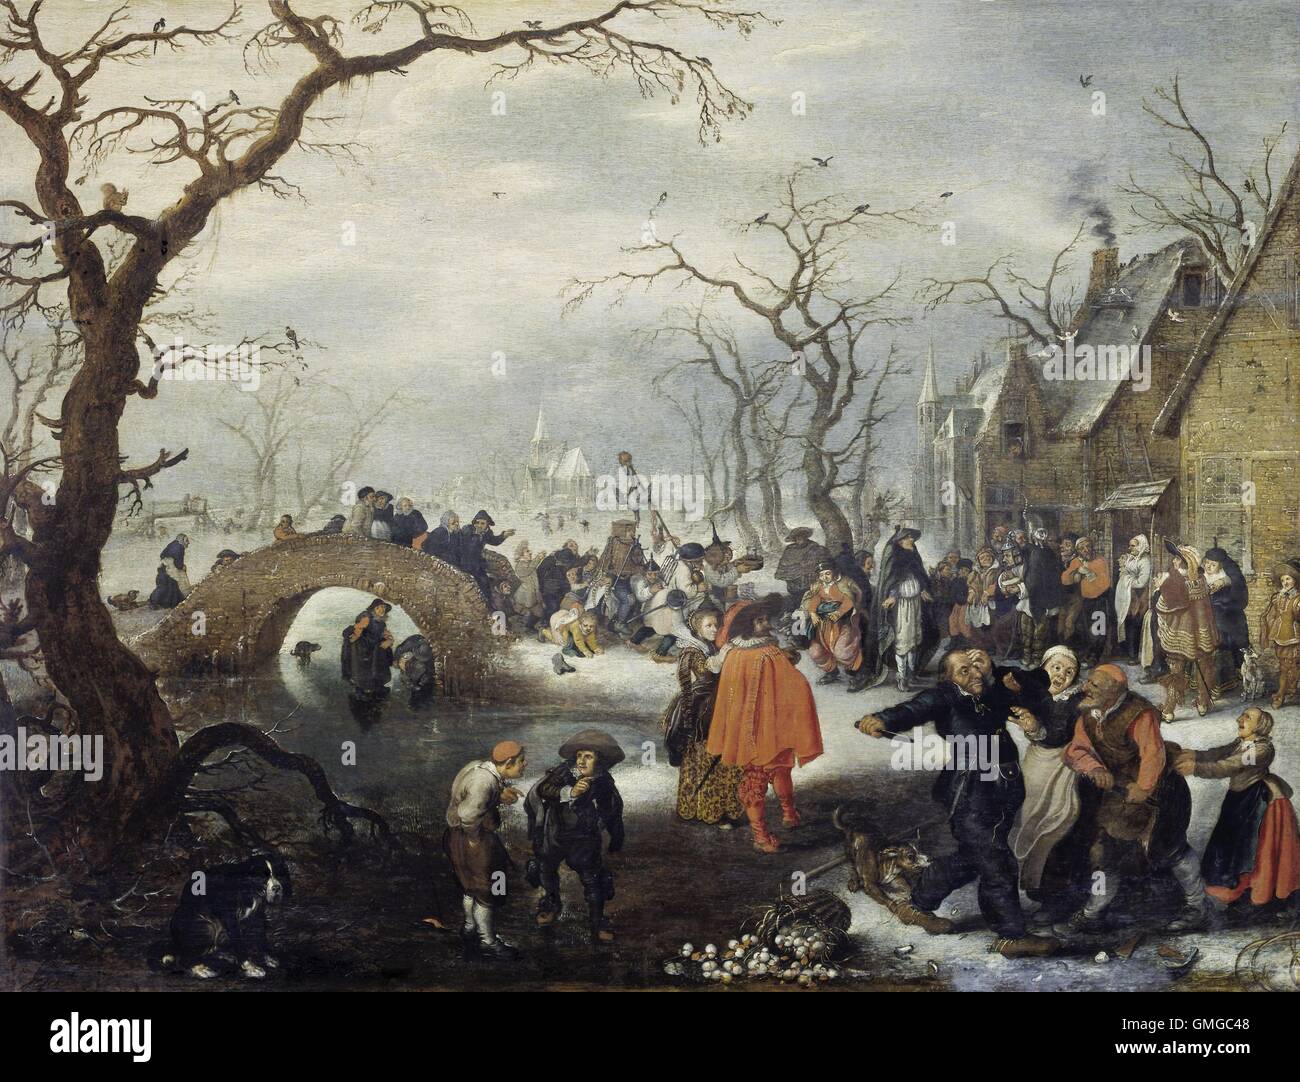 Shrove Tuesday in the Country, by Adriaen van de Venne, 1625 Dutch painting, oil on panel. Peasants at a tavern on Shrove Tuesday, the day preceding Ash Wednesday, the first day of Lent. A procession of absurdly costumed people cross a stone bridge. In the foreground two peasants have a knife fight (BSLOC 2016 3 139) Stock Photo